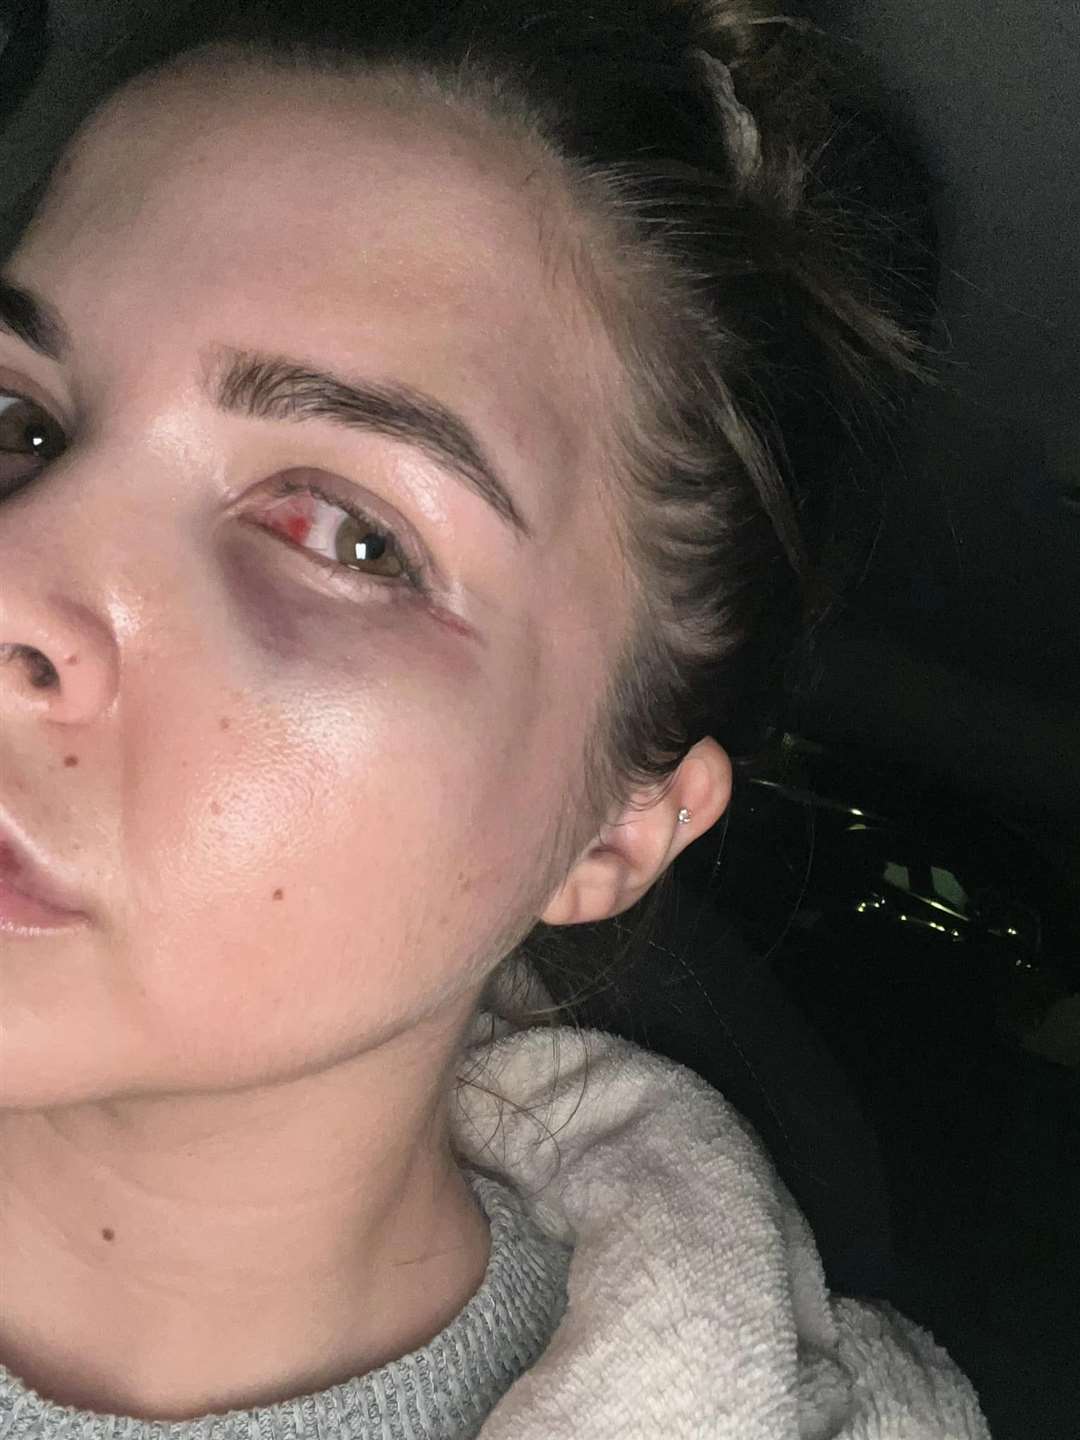 She was assaulted during a night out at Casino Rooms Nightclub, Rochester. Picture: Nadia Zuccarello